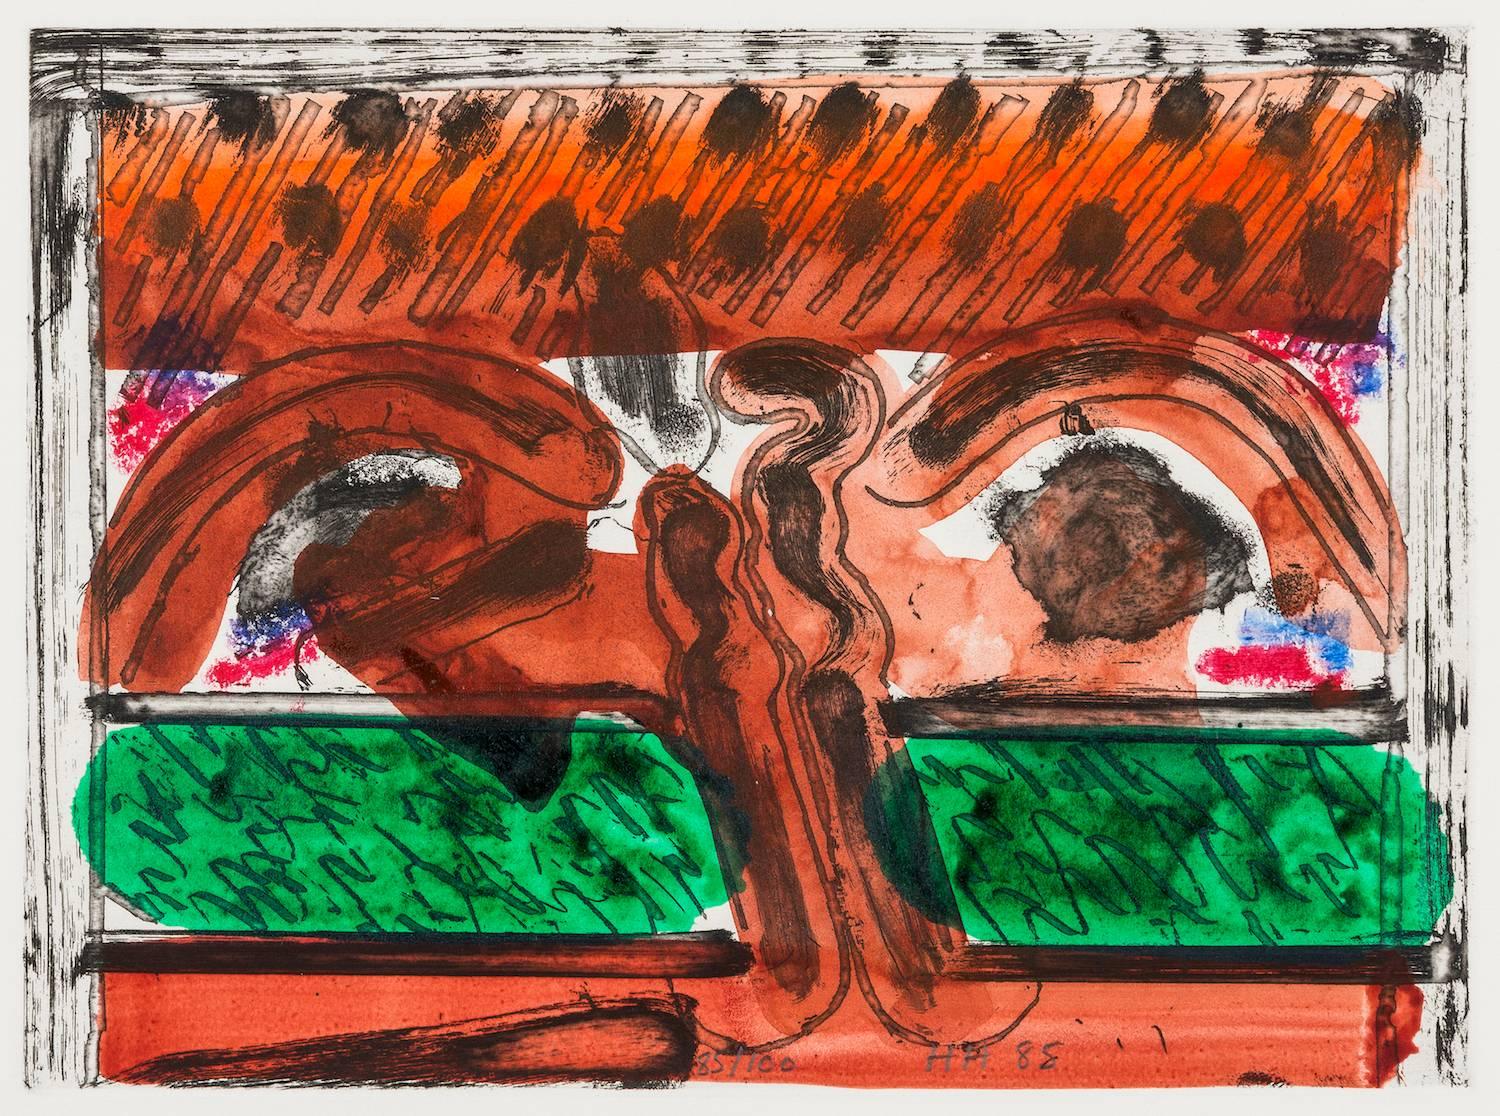 HOWARD HODGKIN
DH in Hollywood, 1979–1985

Soft-ground etching printed in black, with hand colouring in orange-red, 
brown, and green watercolour and red and blue oil pastel , on off-white BFK Rives mould-made paper
Initialled, dated and numbered